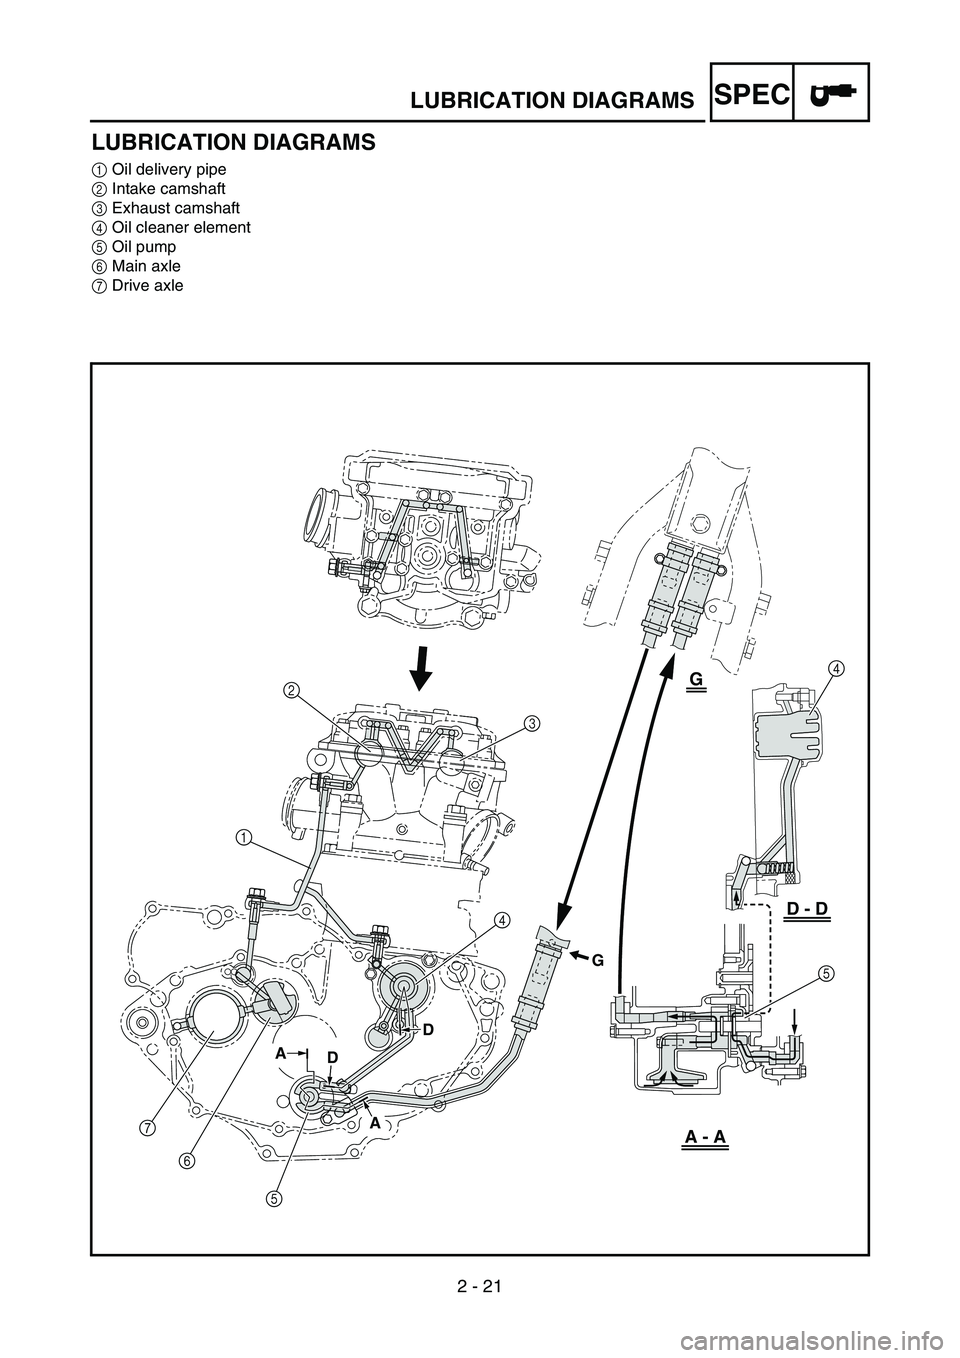 YAMAHA WR 450F 2005  Betriebsanleitungen (in German) 2 - 21
SPECLUBRICATION DIAGRAMS
LUBRICATION DIAGRAMS
1Oil delivery pipe
2Intake camshaft
3Exhaust camshaft
4Oil cleaner element
5Oil pump
6Main axle
7Drive axle
7
6
543 24
5
A - A
D - D
G
G
D
D A
A
1 